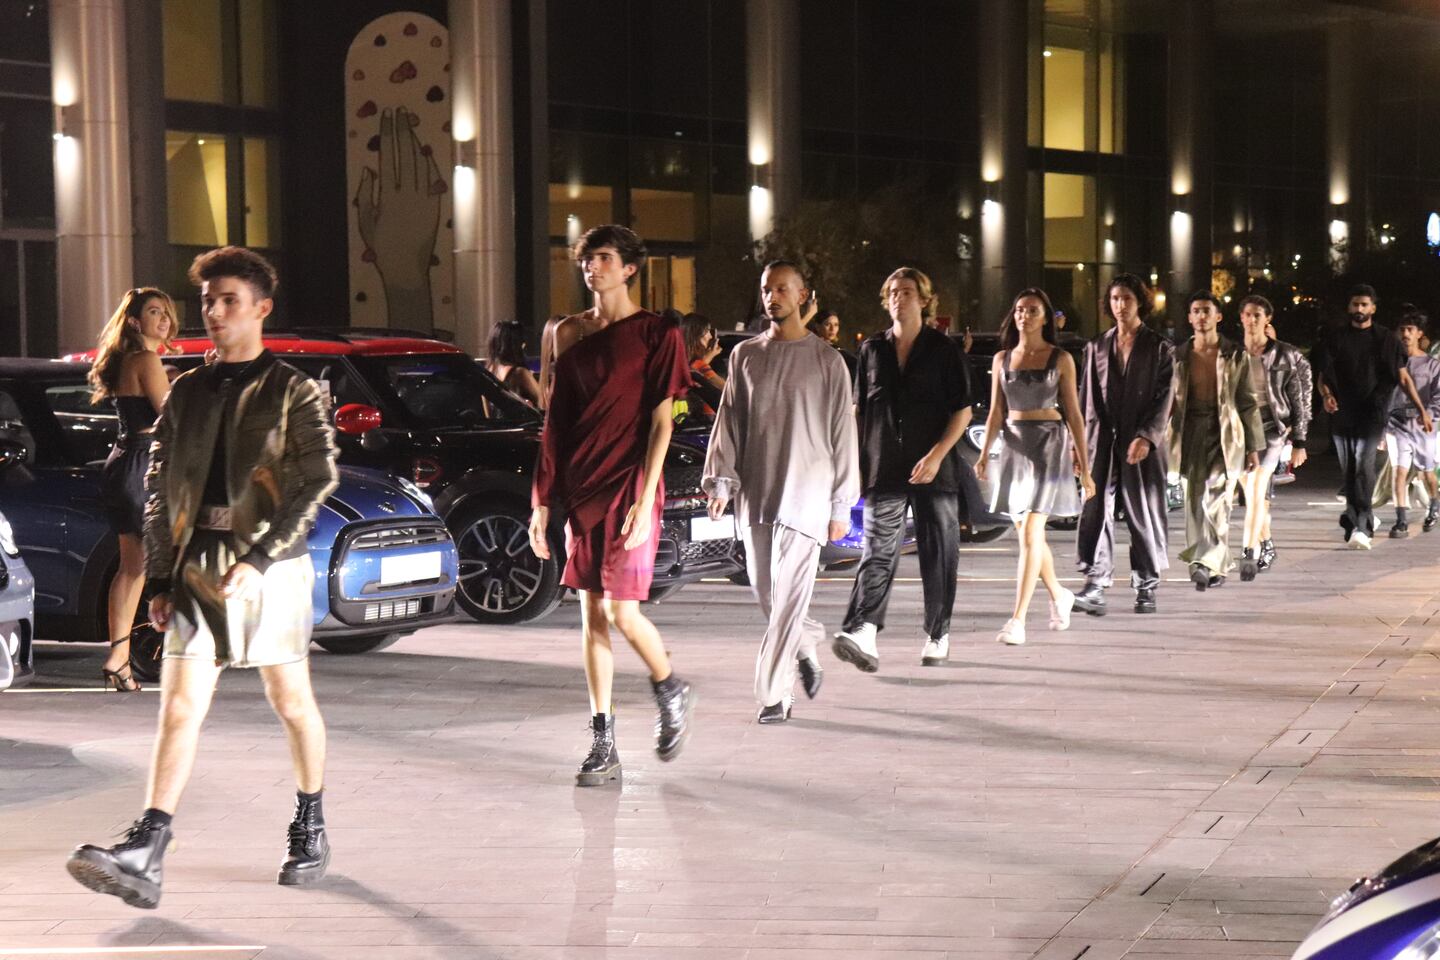 Anomalous wrapped up the event with a physical show in the Dubai Design District. Arab Fashion Council